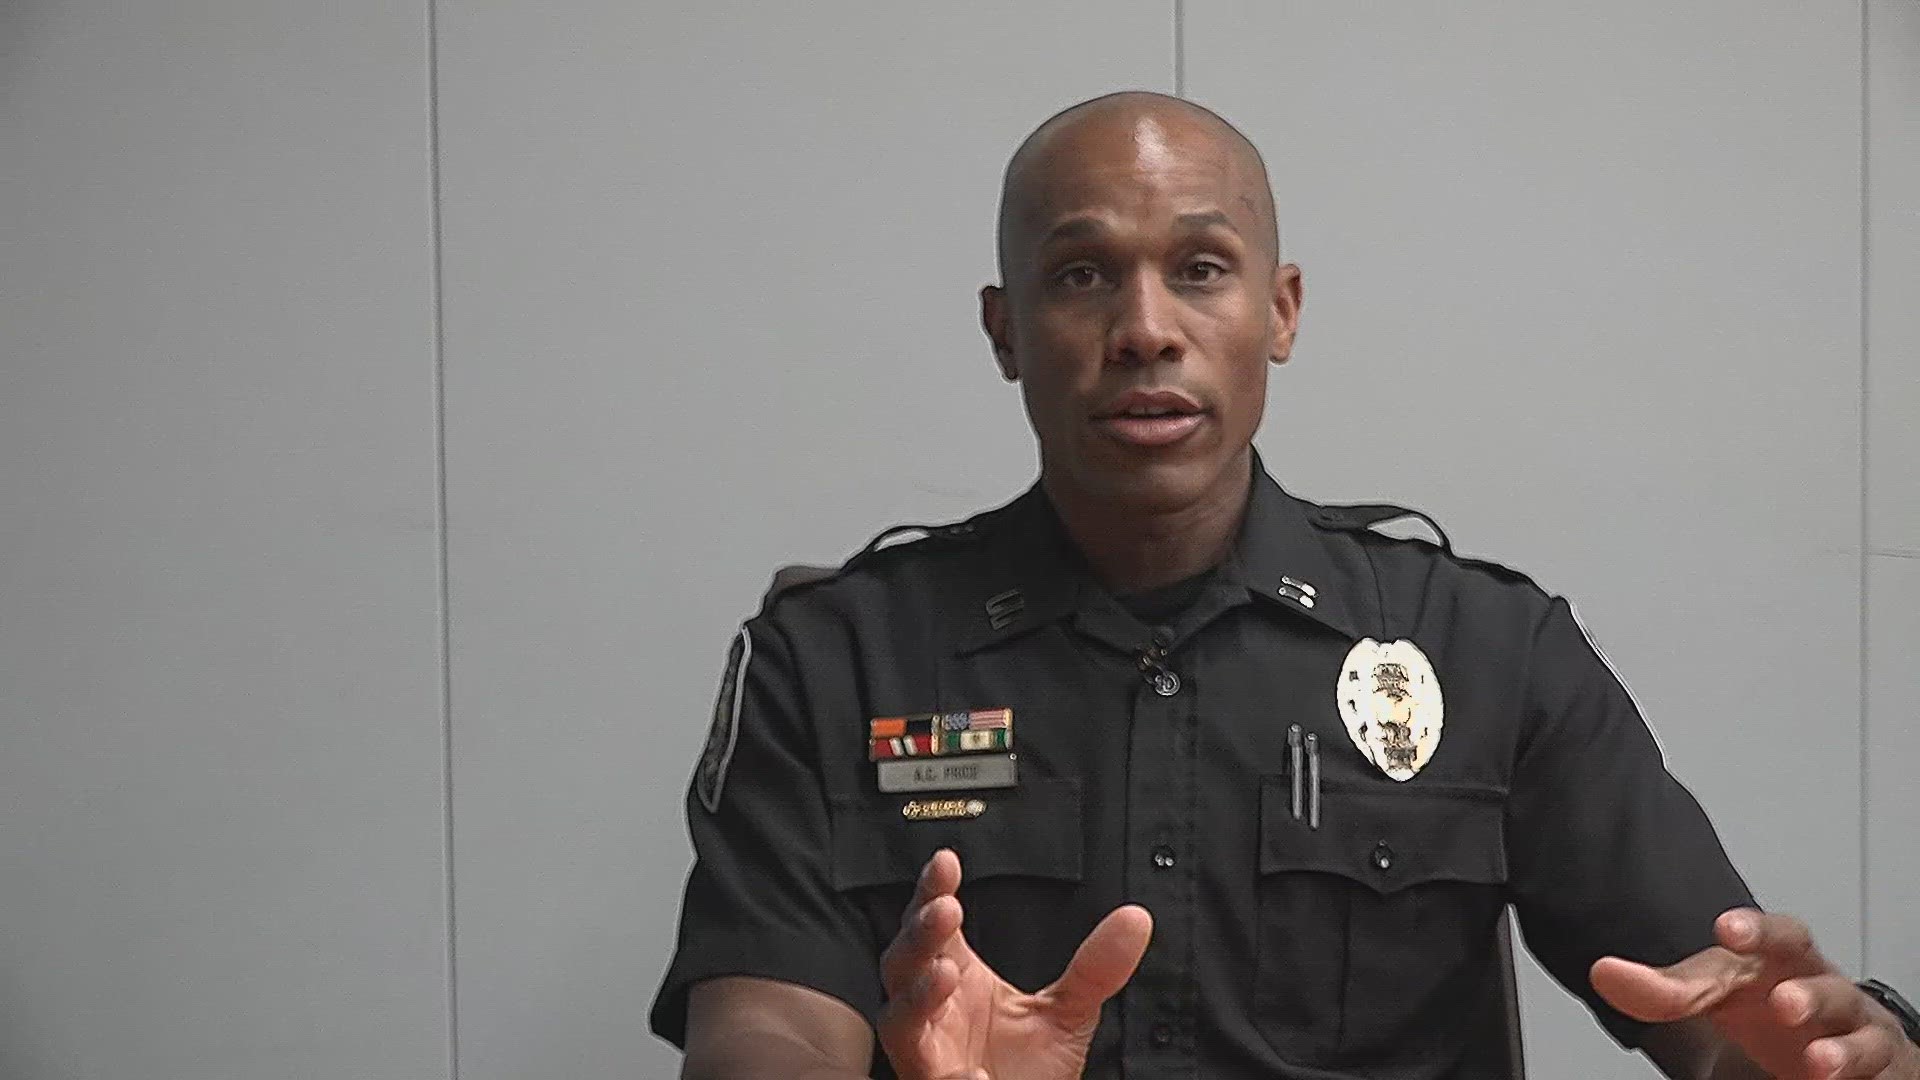 GPD says gun-related crimes are down 19% since the team launched.